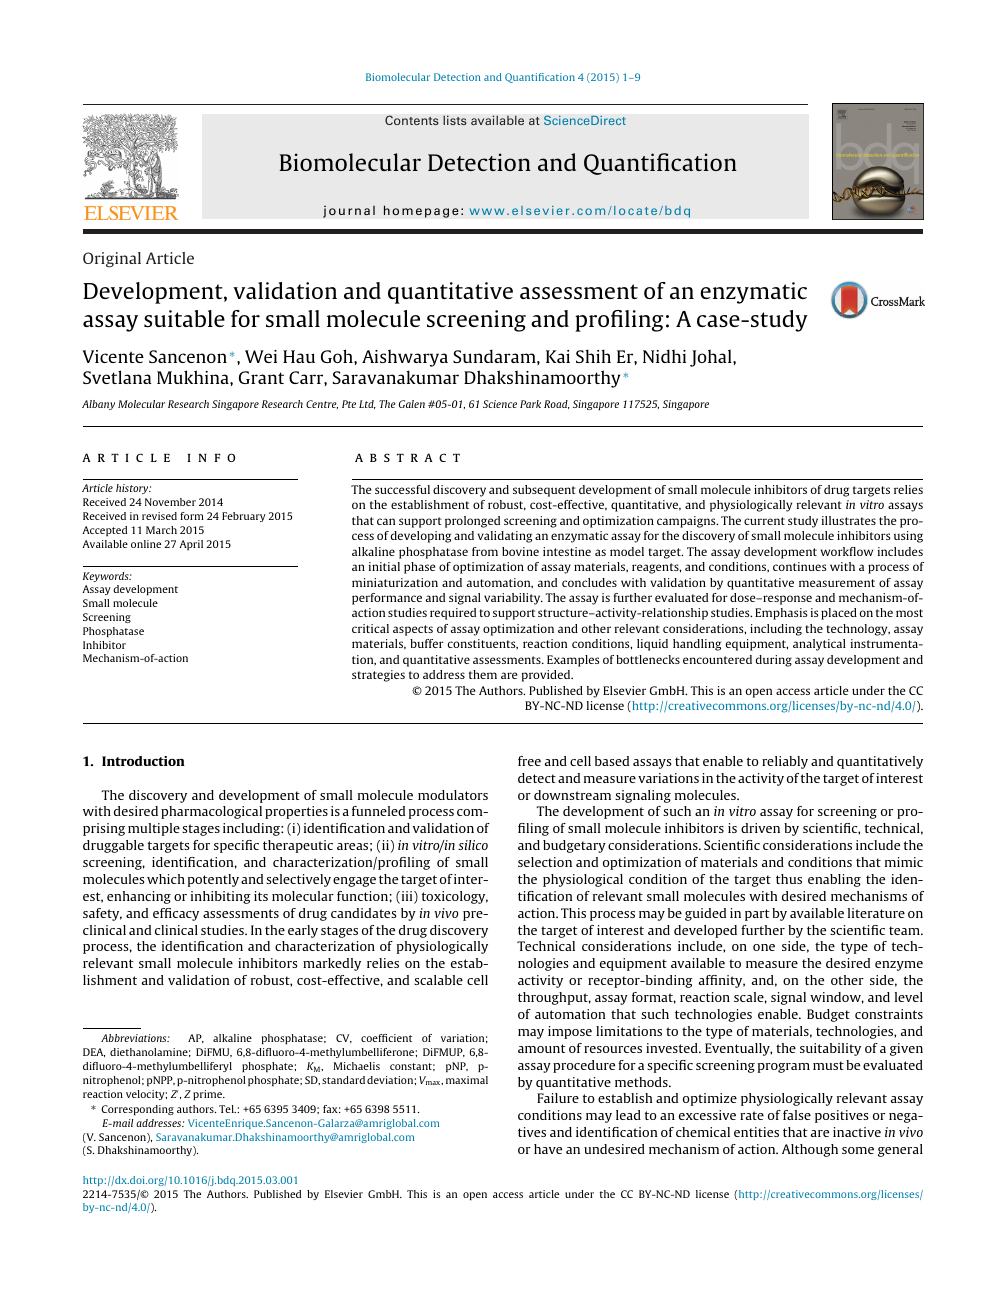 Development Validation And Quantitative Assessment Of An Enzymatic Assay Suitable For Small Molecule Screening And Profiling A Case Study Topic Of Research Paper In Chemical Sciences Download Scholarly Article Pdf And Read